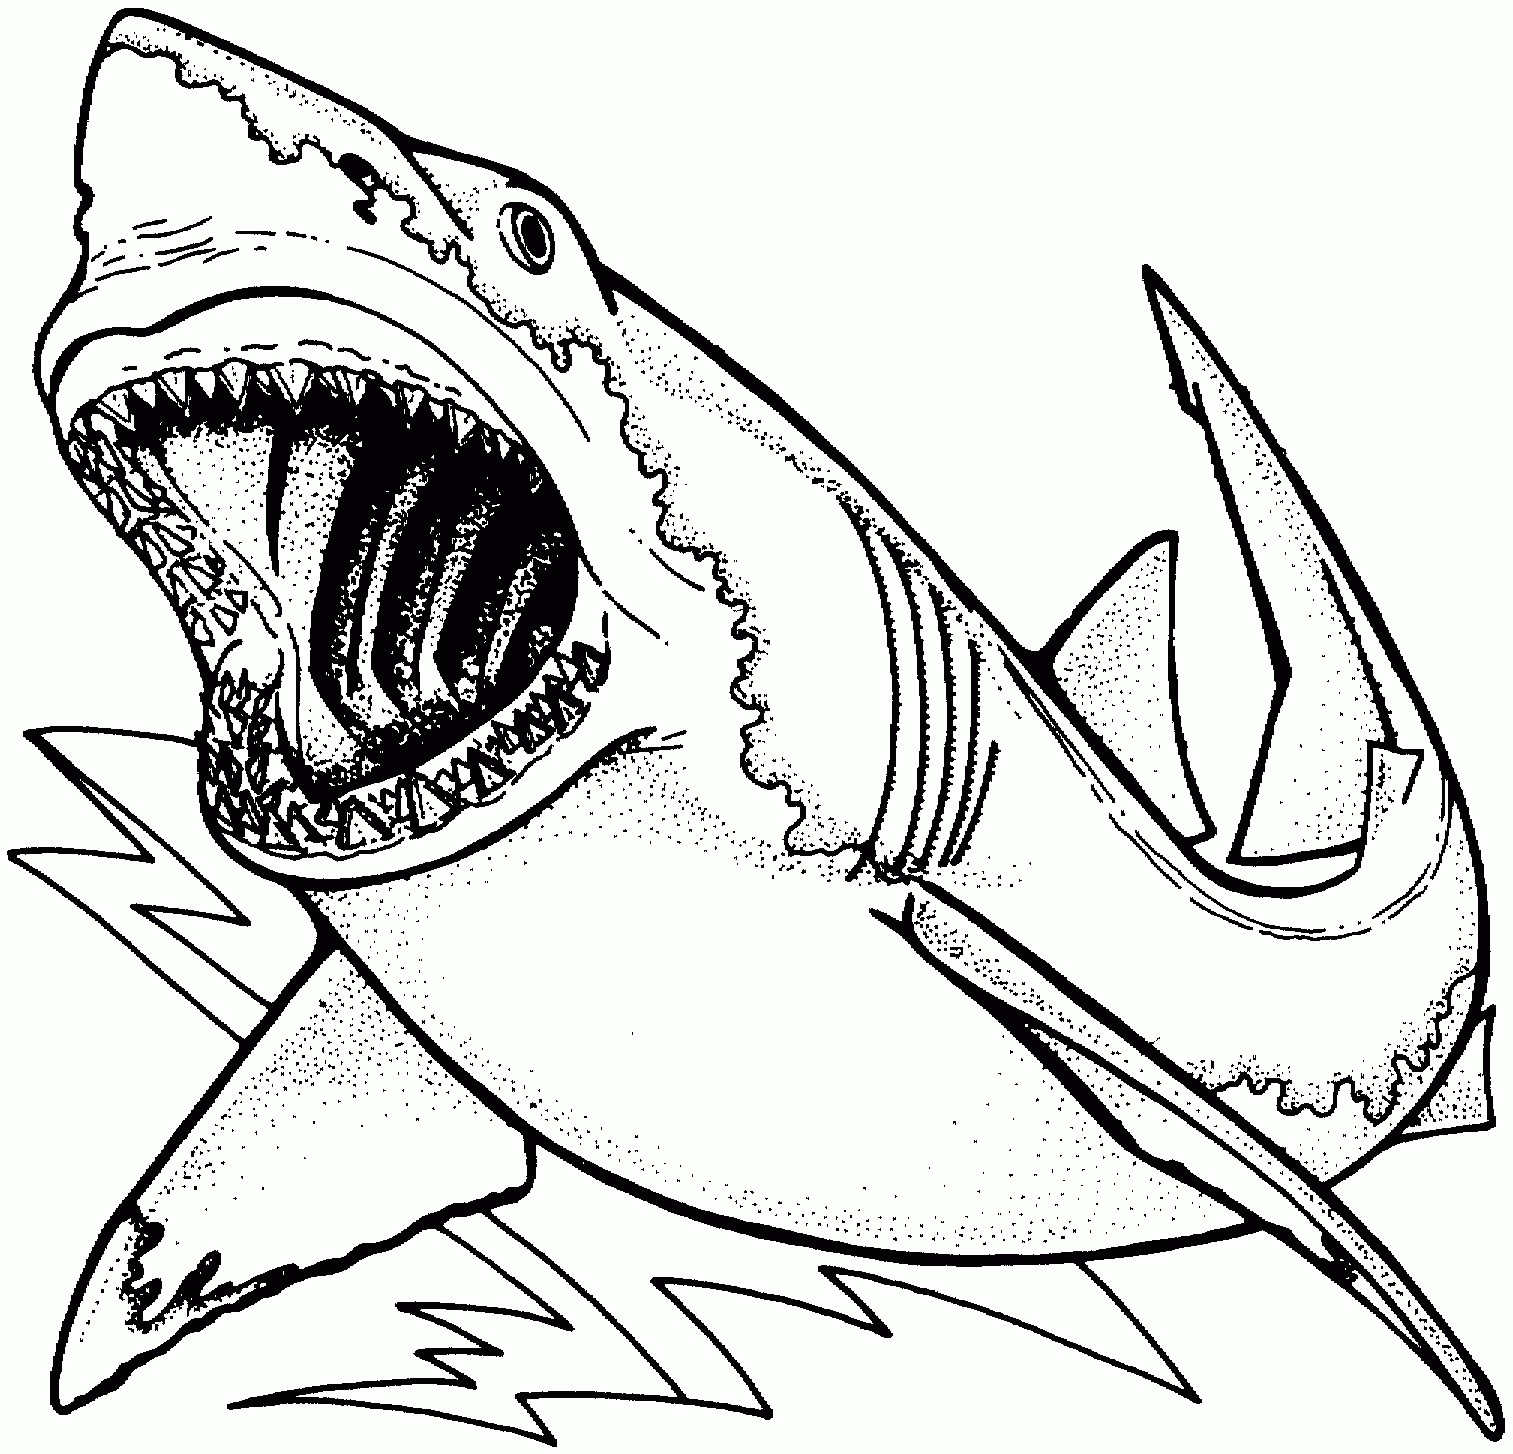 Awesome Great White Shark Coloring Page Free Printable Coloring Pages For Kids